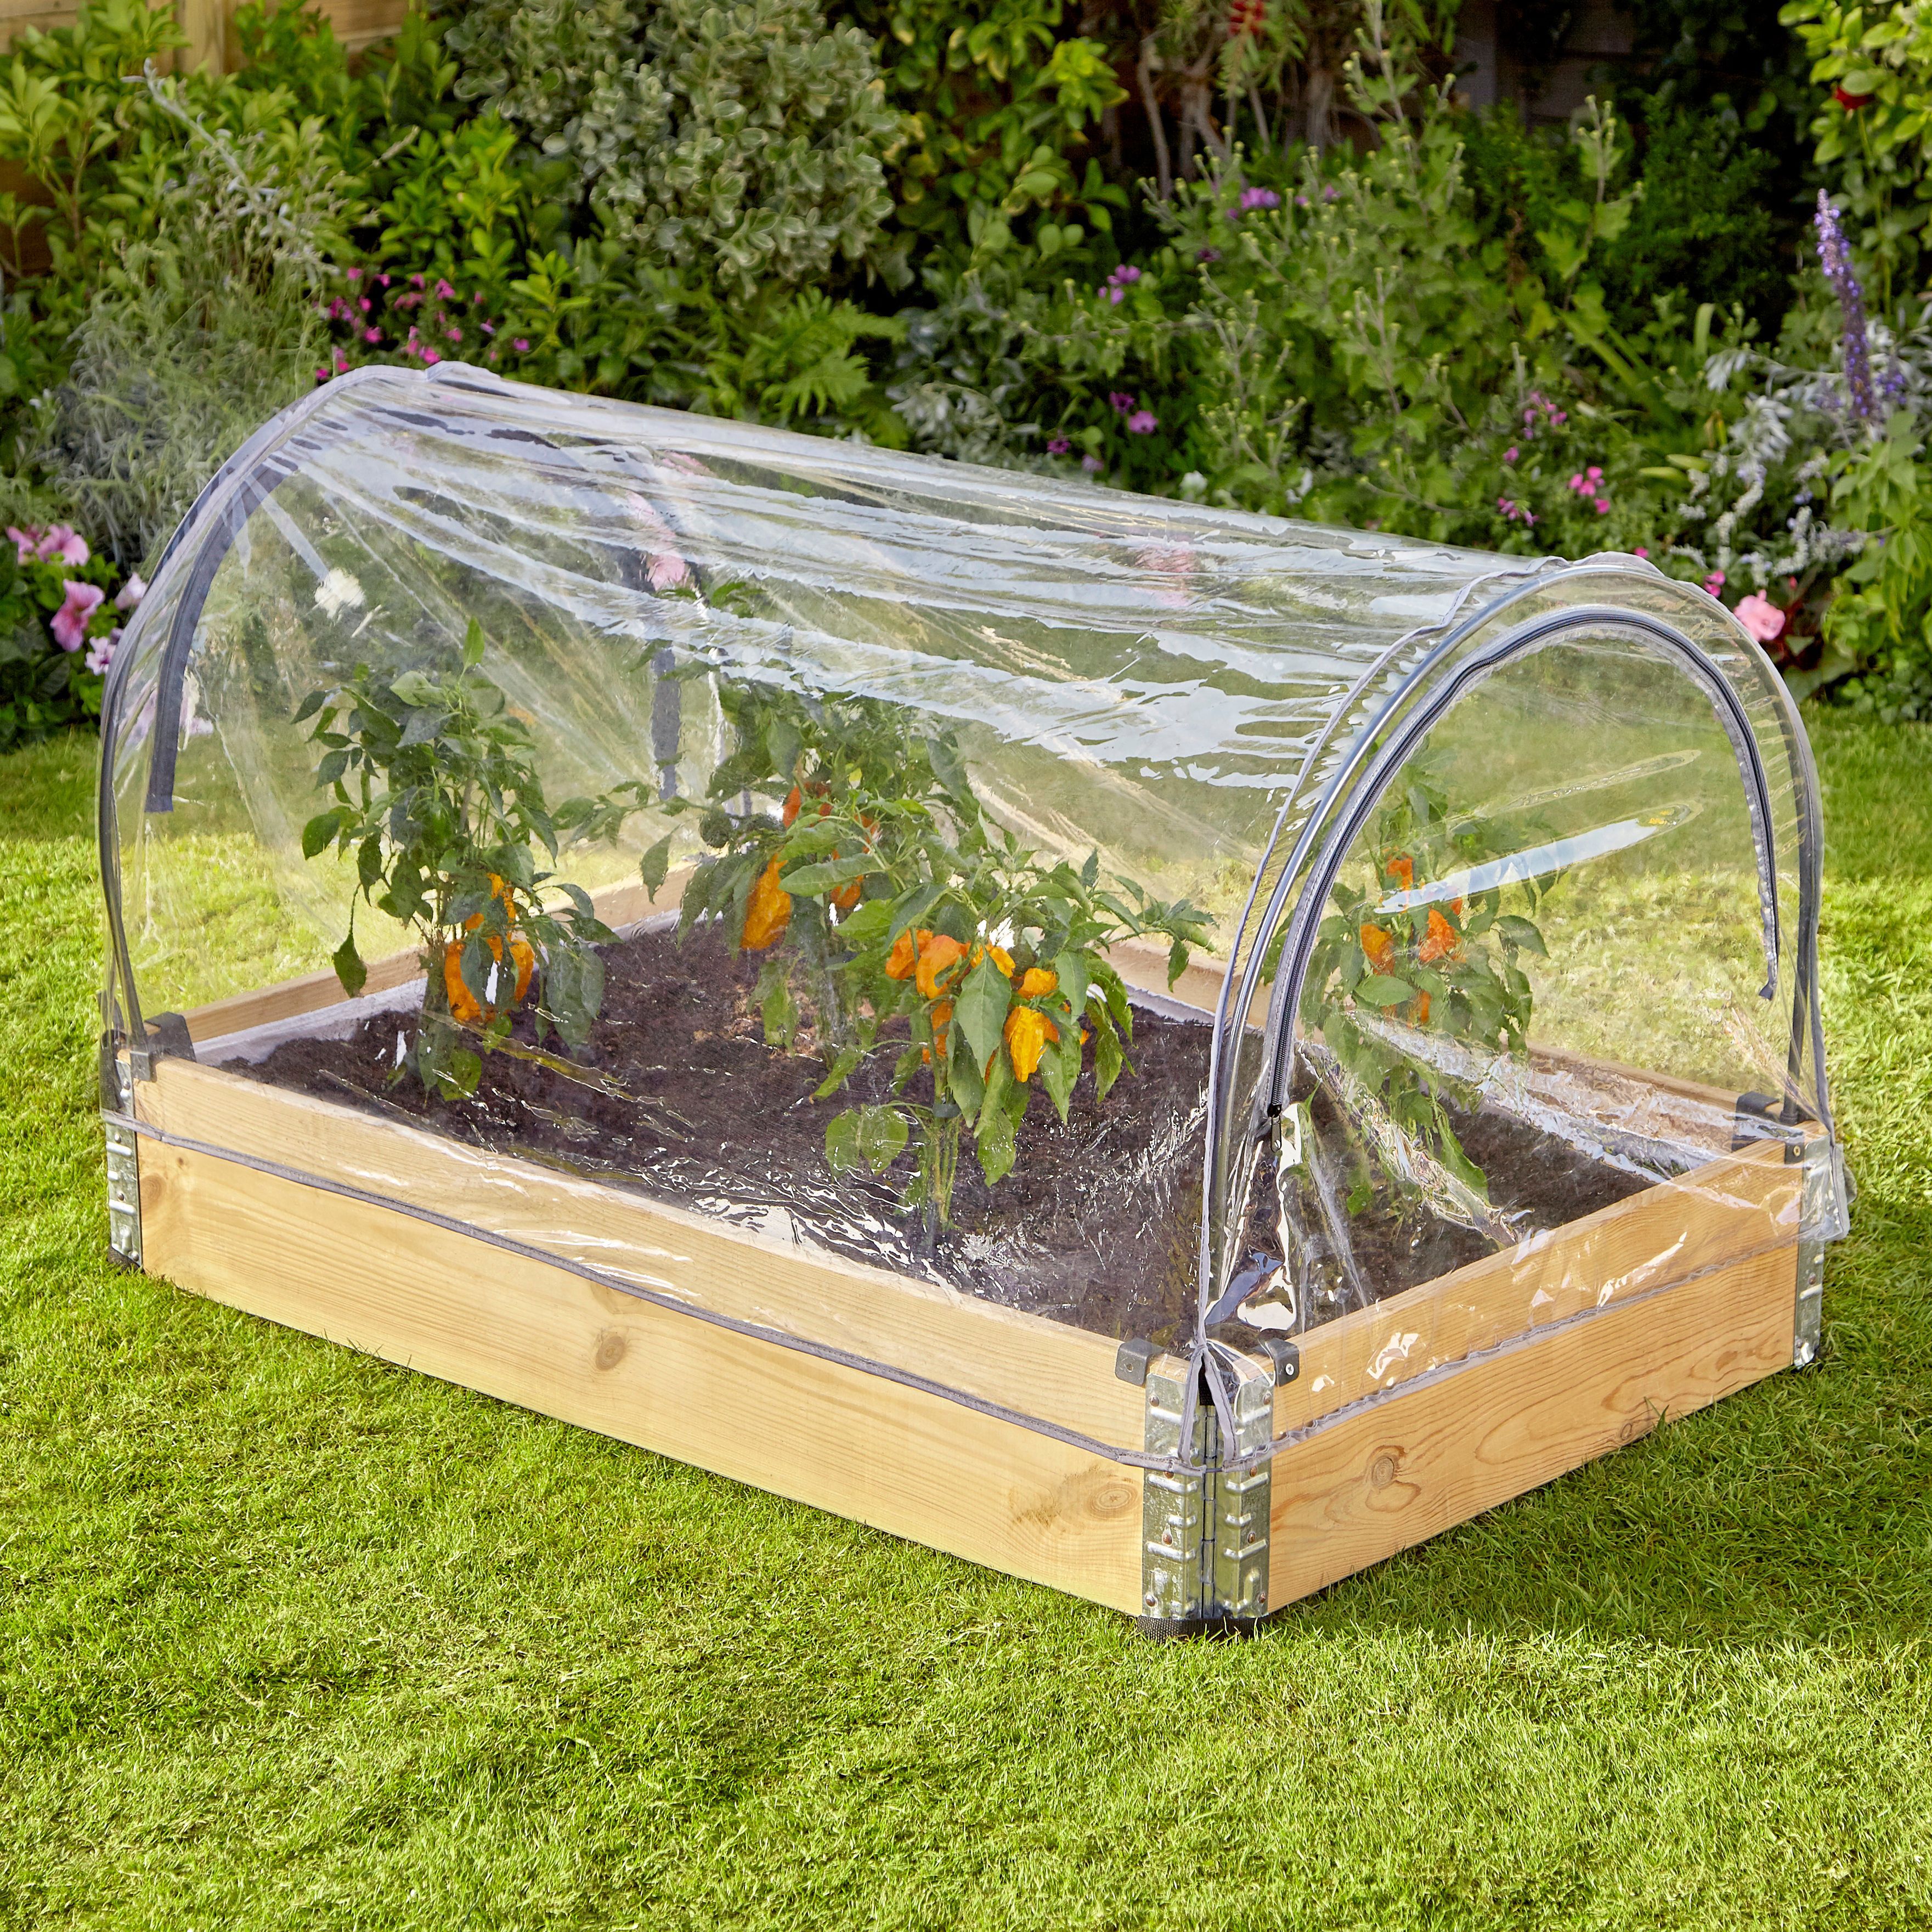 Verve Kitchen garden Large 0.88m² Grow tunnel cover with plastic cover